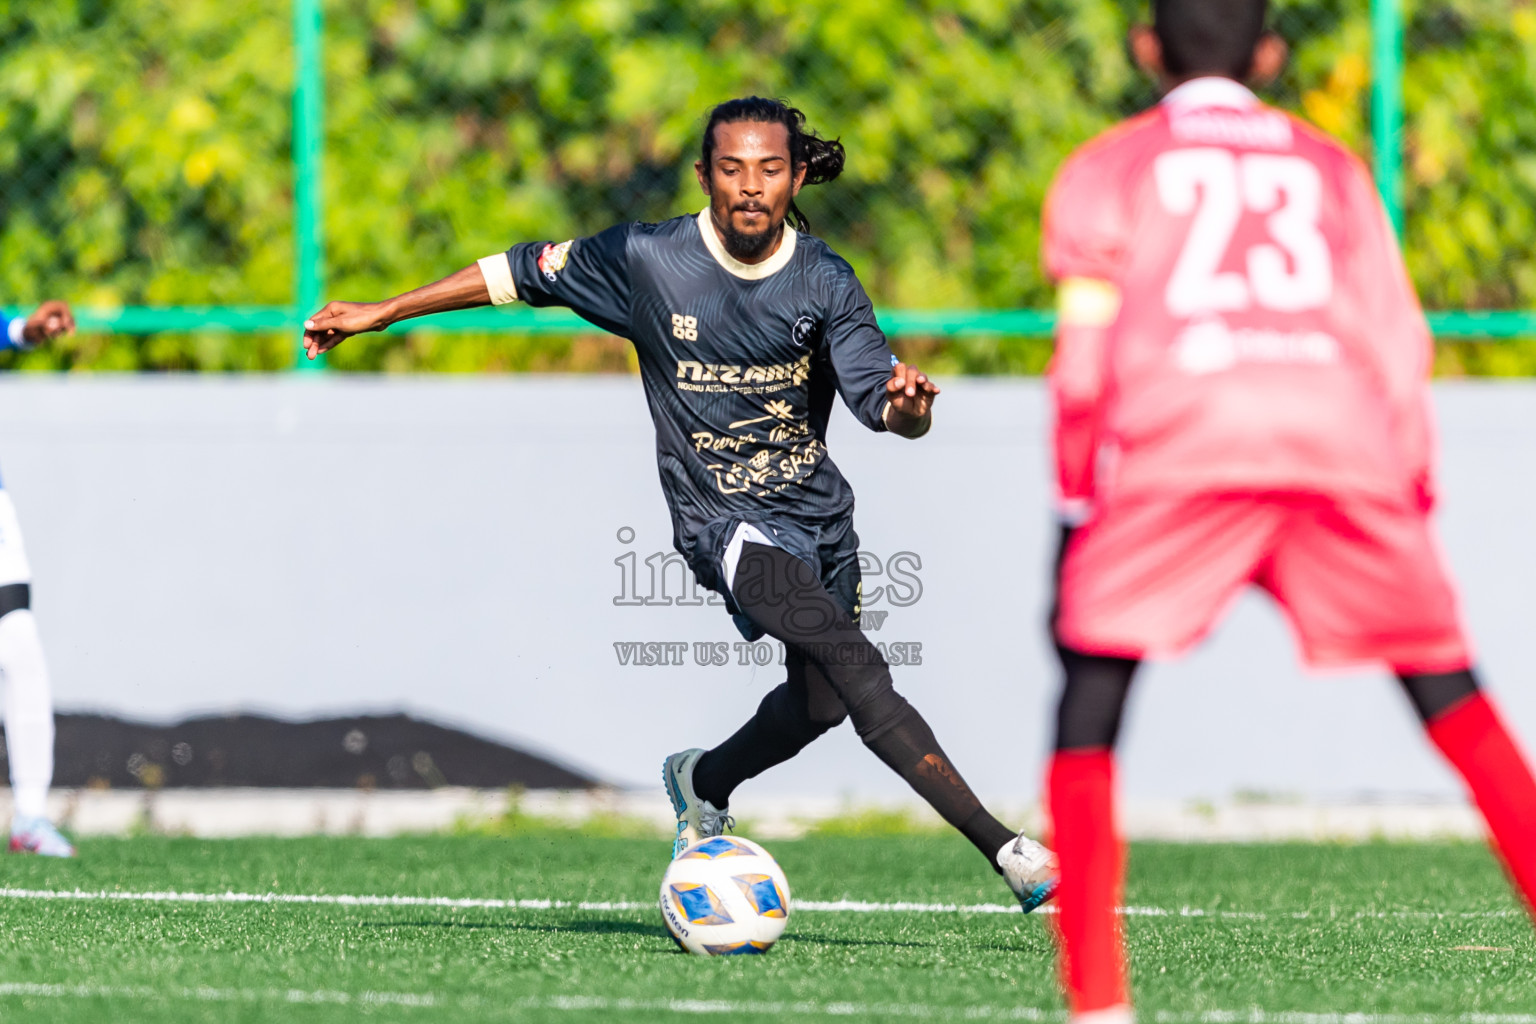 JT Sports vs Chester Academy from Manadhoo Council Cup 2024 in N Manadhoo Maldives on Sunday, 18th February 2023. Photos: Nausham Waheed / images.mv